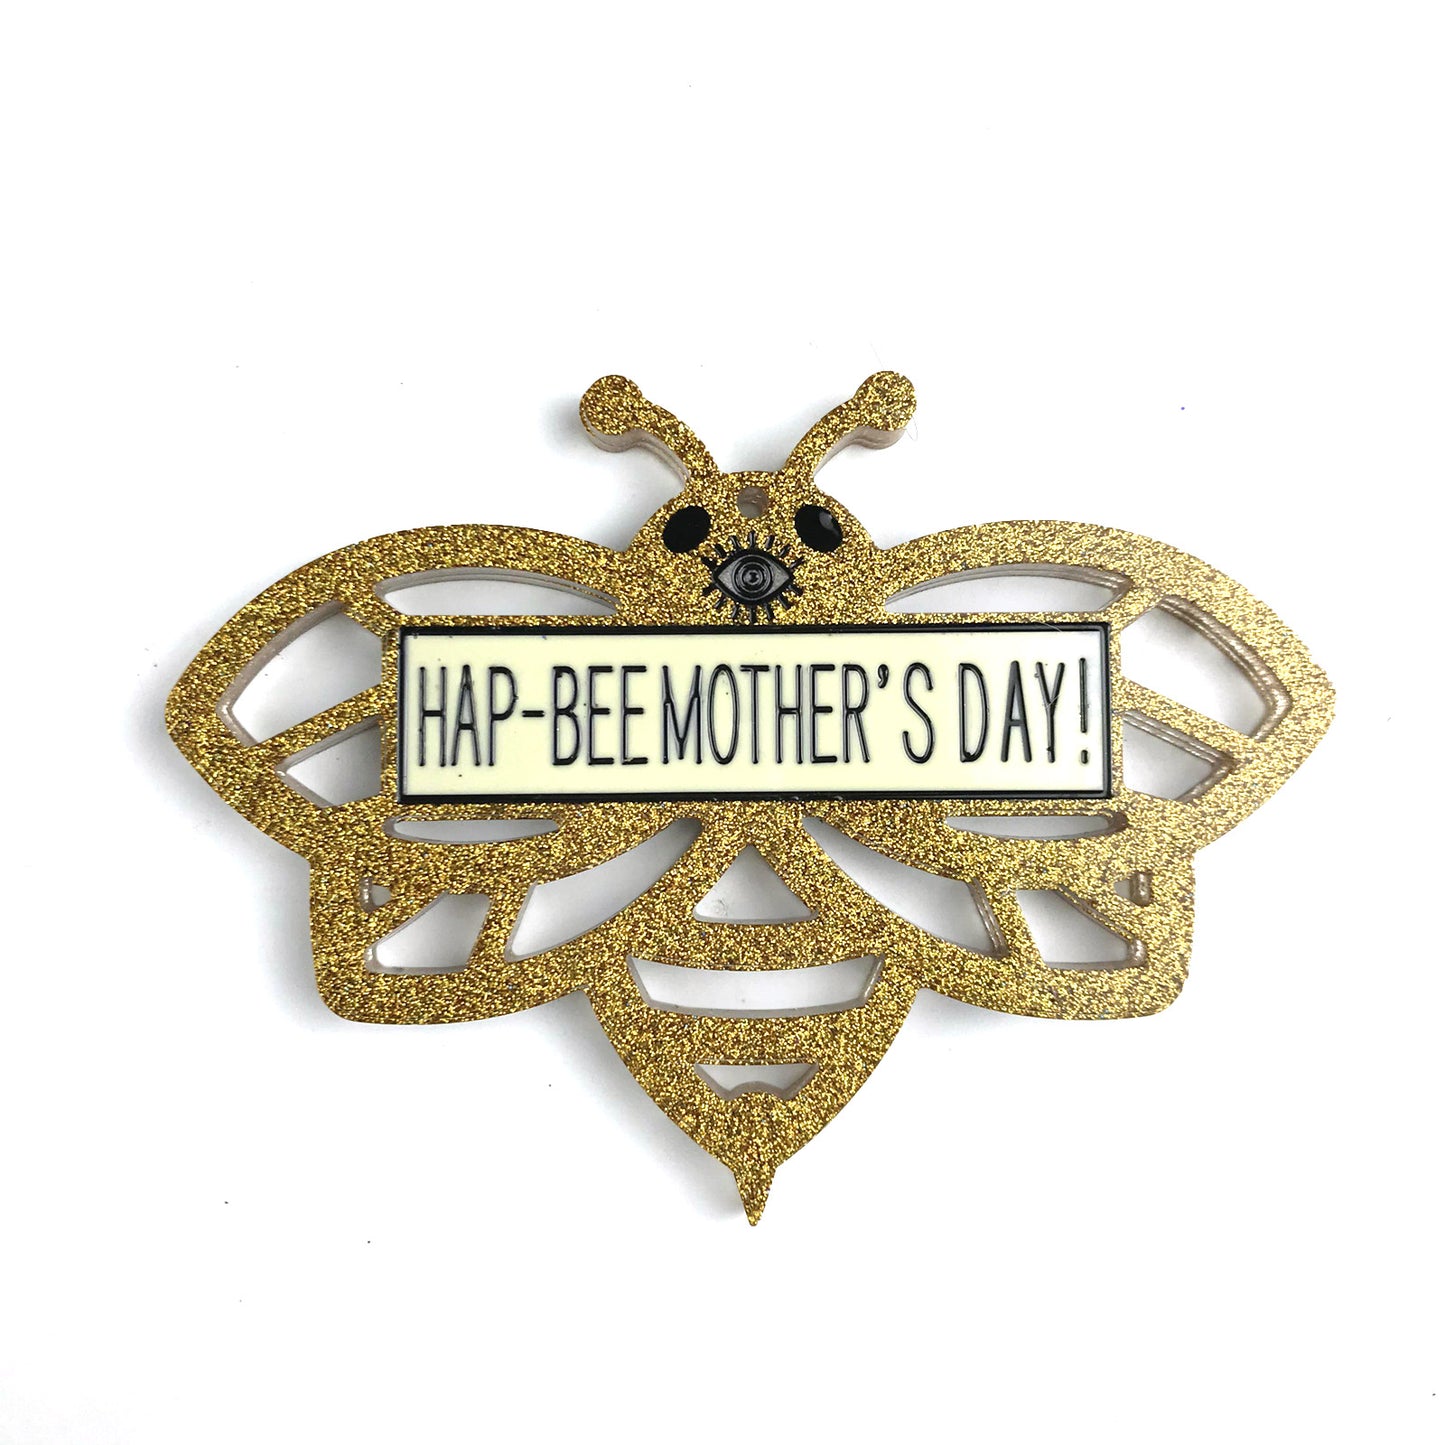 HAP-BEE MOTHER'DAY Wall Hanging Resin Mold